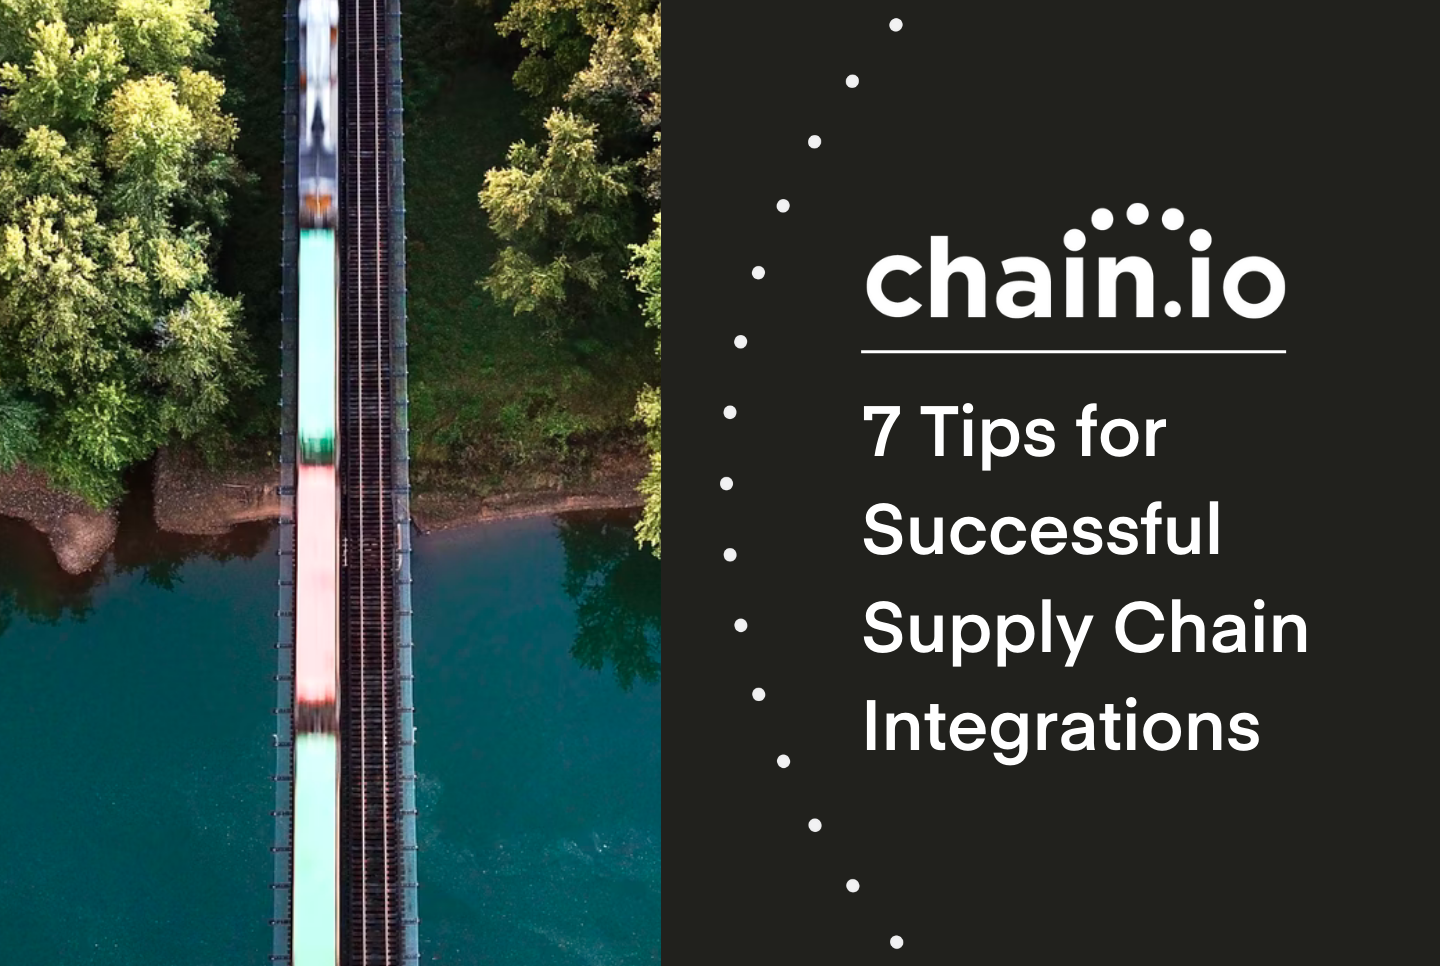 Whether you’re integrating modern APIs, legacy EDI systems, hybrid cloud solutions, or some combination of them all, there are basic principles that you can put in place to make sure you deliver logistics and supply chain integrations on time and on budget.